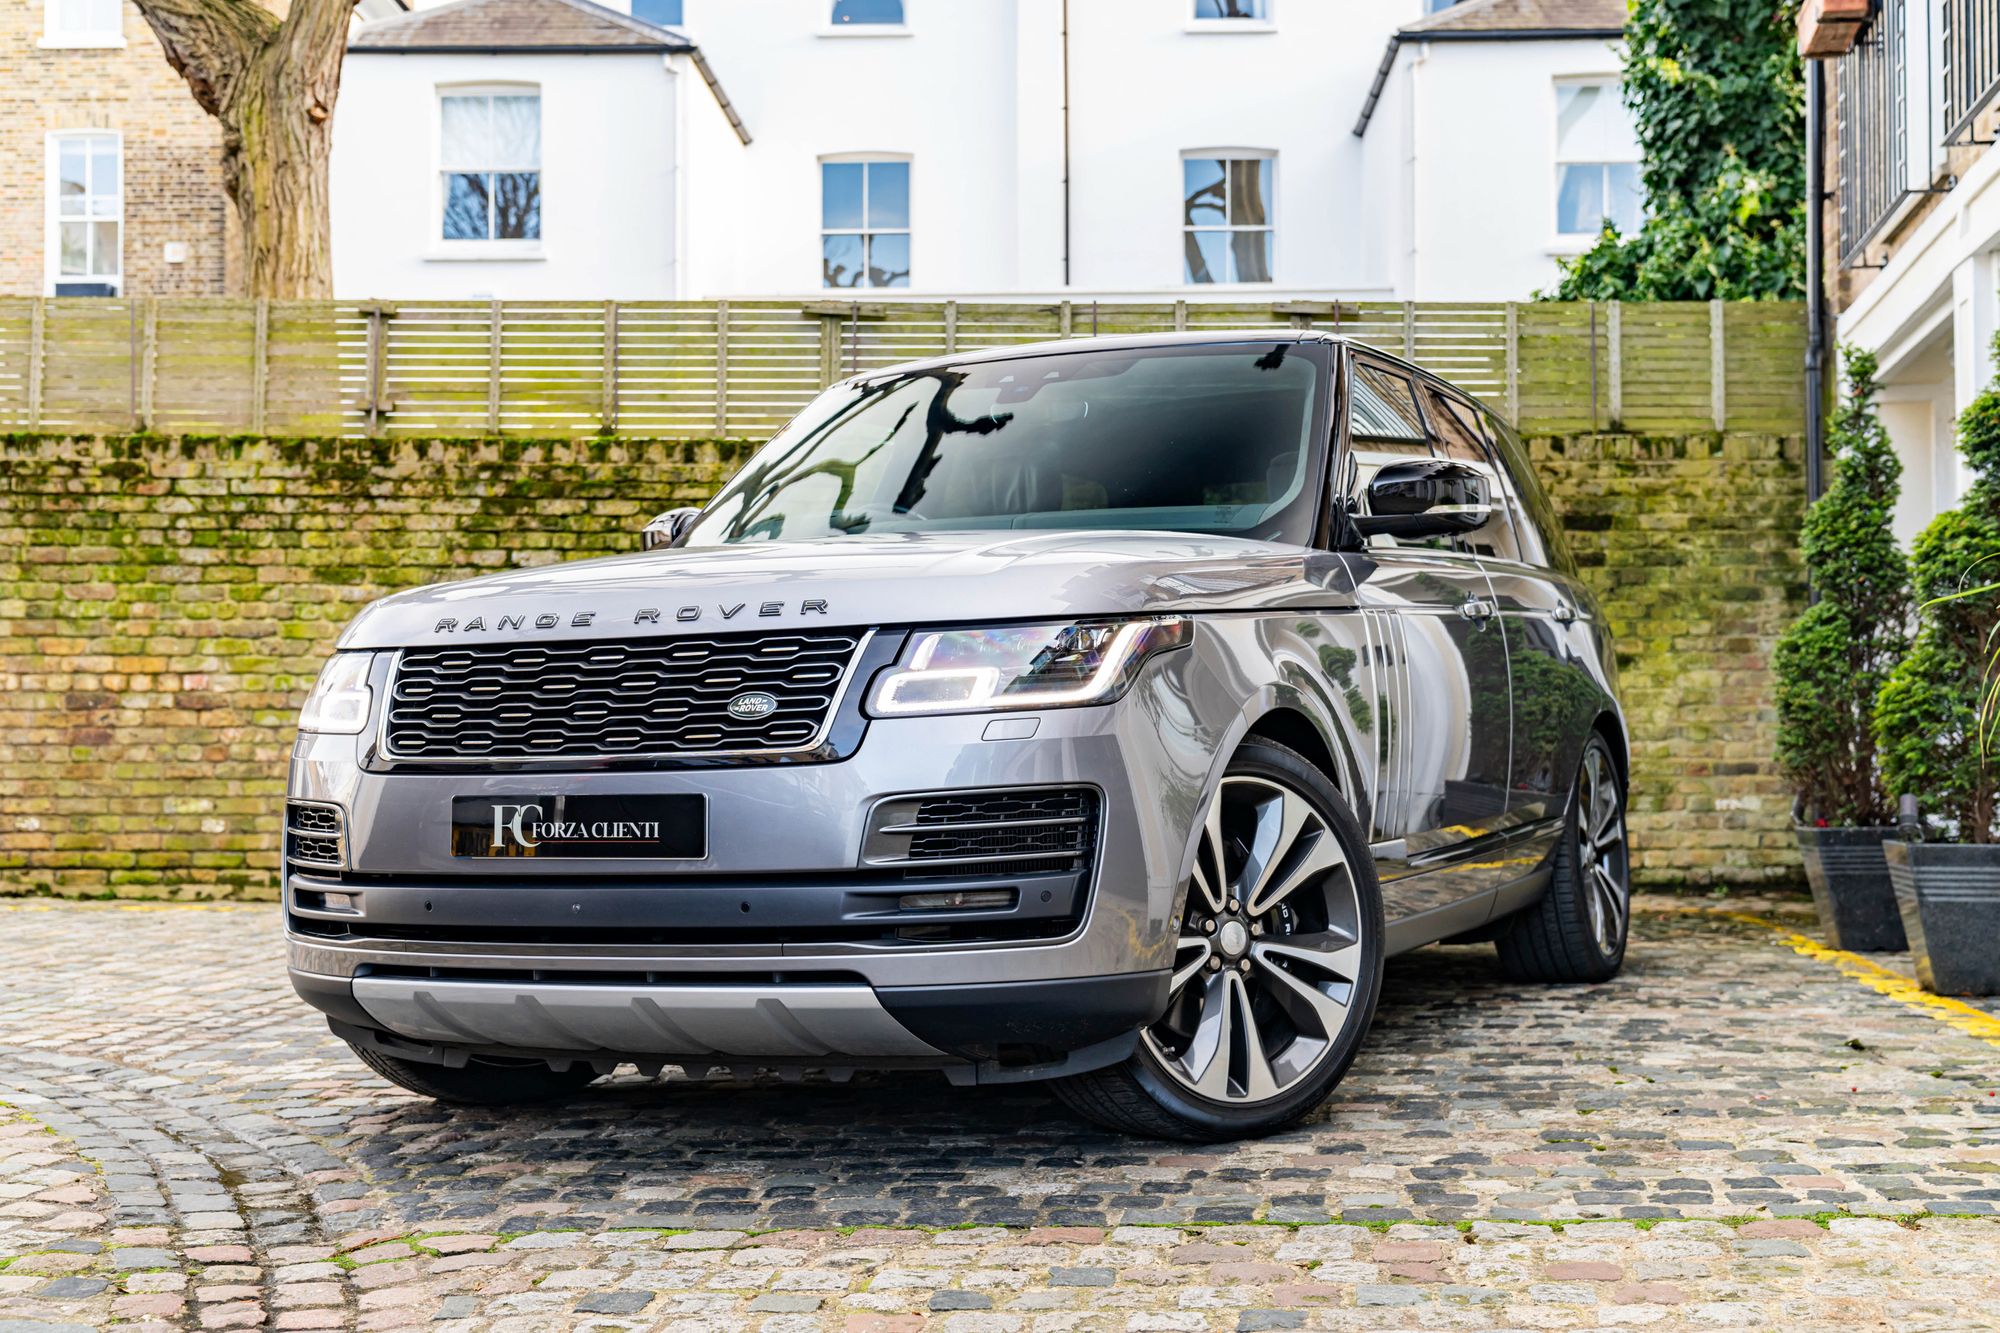 2019 Range Rover SV Autobiography for sale